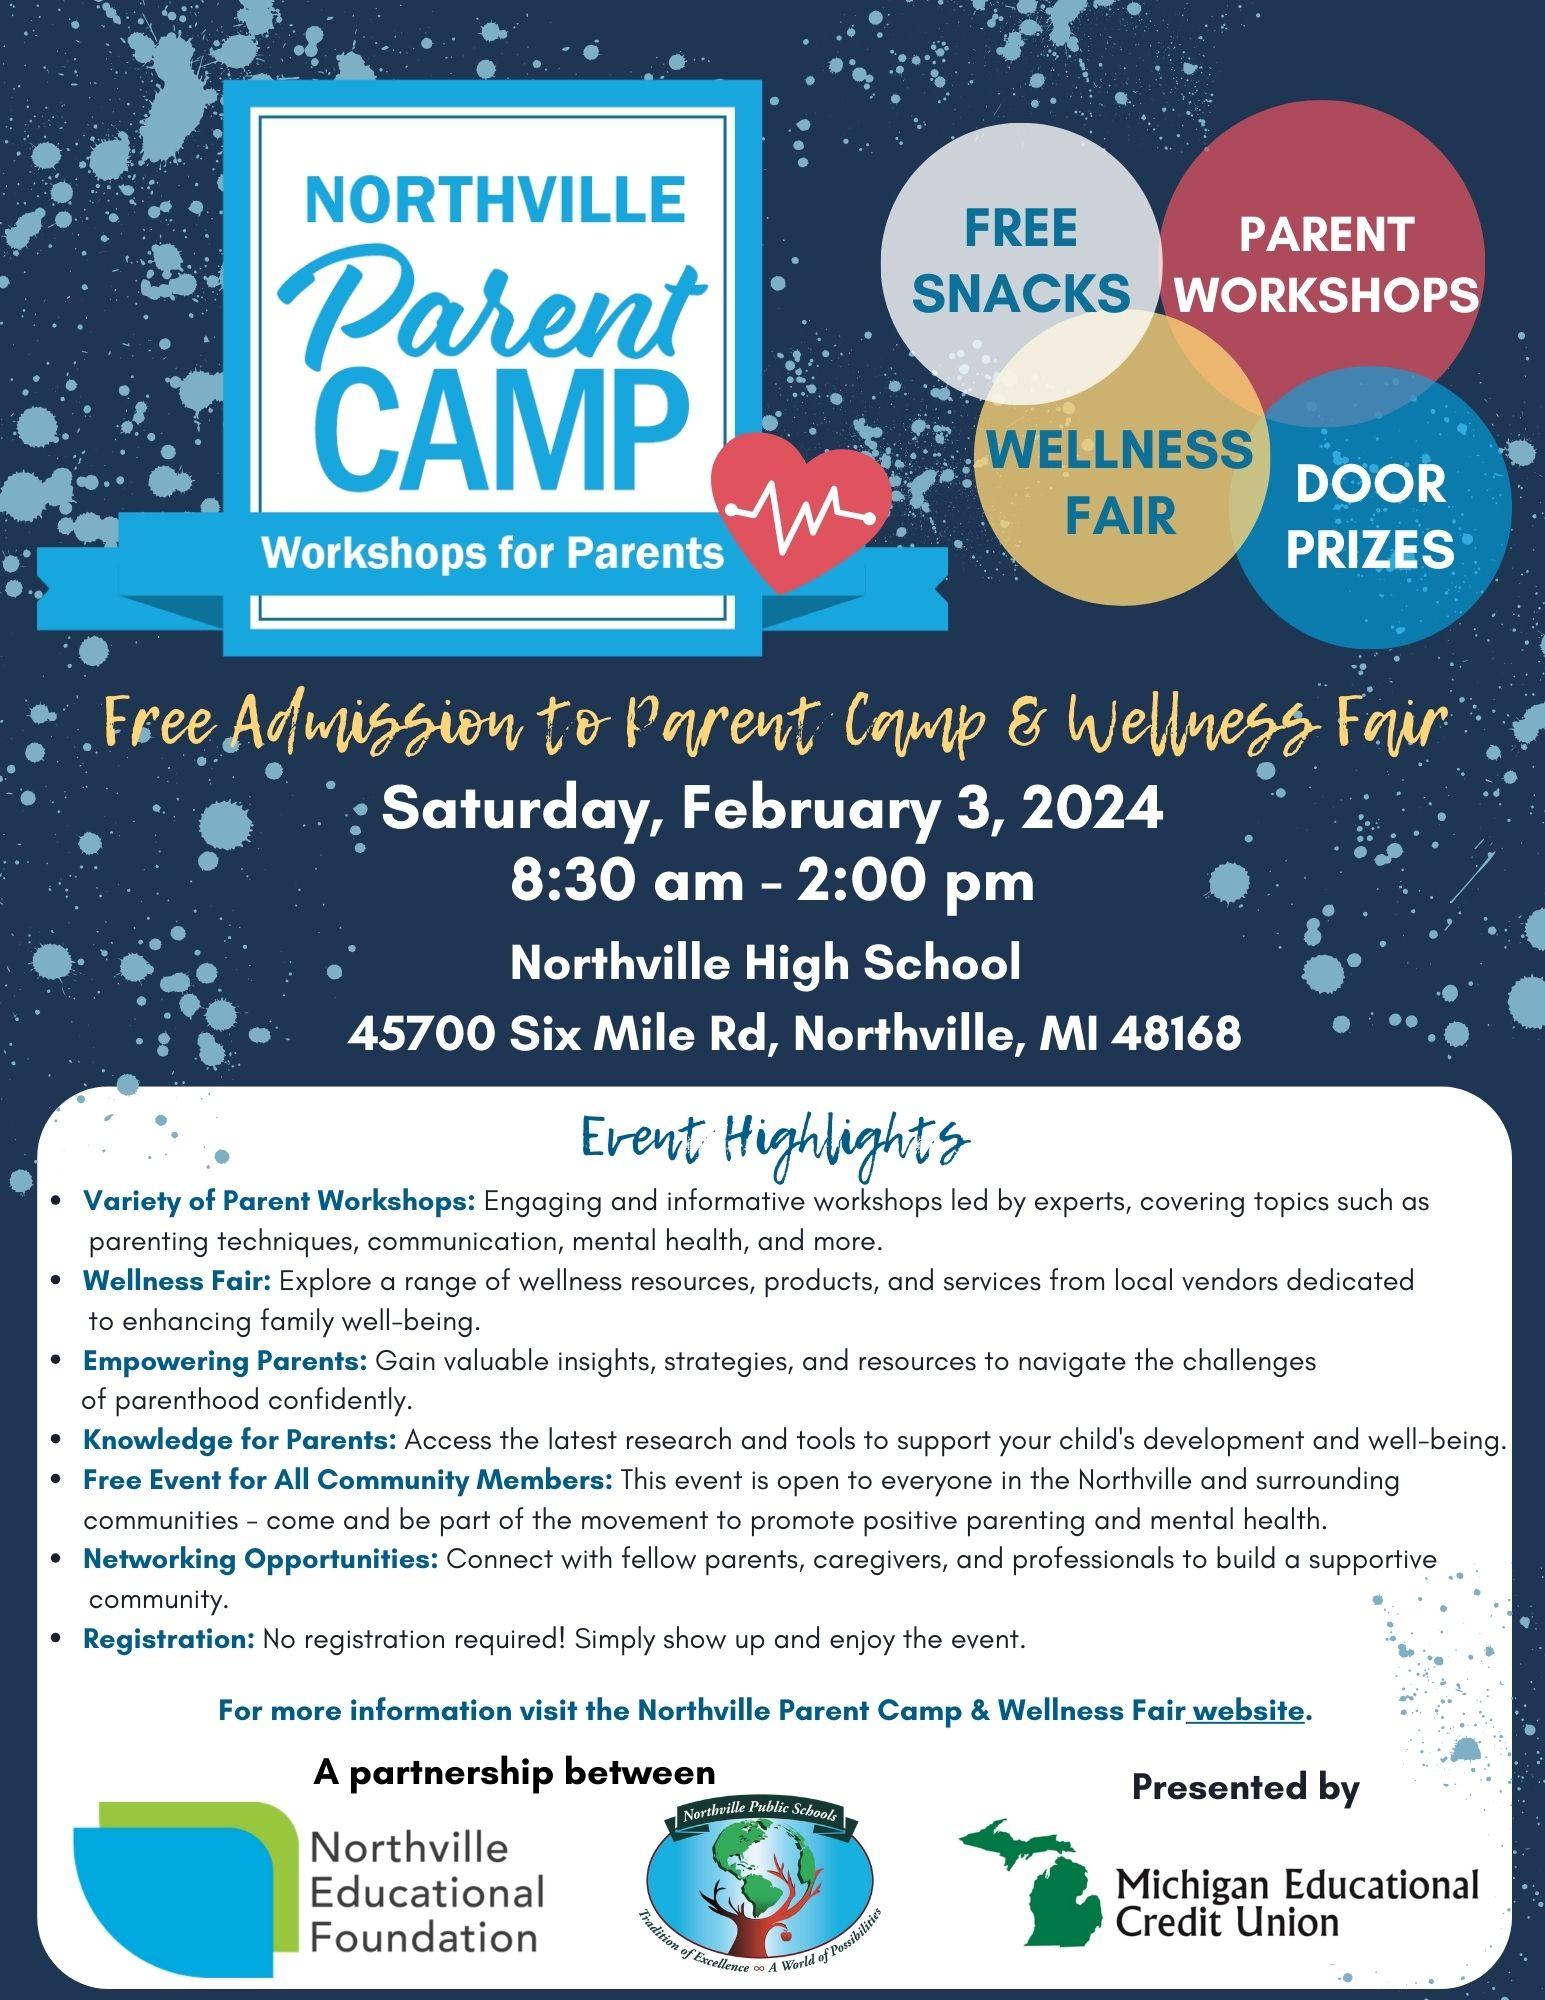 Northville Parent Camp - Workshops for Parents - Free snacks - Parent workshops - wellness fair - door prizes - Free admission to parent camp and wellness fair - Saturday, February 3, 2024, 8:30am-2:00pm, Northville High School: 45700 Six Mile Rd, Northville, MI 48168 - Event Highlights: Variety of Parent Workshops: Engaging and informative workshops led by experts, covering topics such as parenting techniques, communication, mental health, and more. Wellness Fair: Explore a range of wellness resources, products, and services from local vendors dedicated to enhancing family well-being. Empowering Parents: Gain valuable insights, strategies, and resources to navigate the challenges of parenthood confidently. Knowledge for Parents: Access the latest research and tools to support your child's development and well-being. Free Event for All Community Members: This event is open to everyone in the Northville and surrounding communities - come and be part of the movement to promote positive parenting and mental health. Networking Opportunities: Connect with fellow parents, caregivers, and professionals to build a supportive community. Registration: No registration required! Simply show up and enjoy the event. For more information visit the Northville Parent Camp & Wellness Fair website. A partnership between Northville Educational Foundation, Northville Public Schools and Presented by: Michigan Educational Credit Union